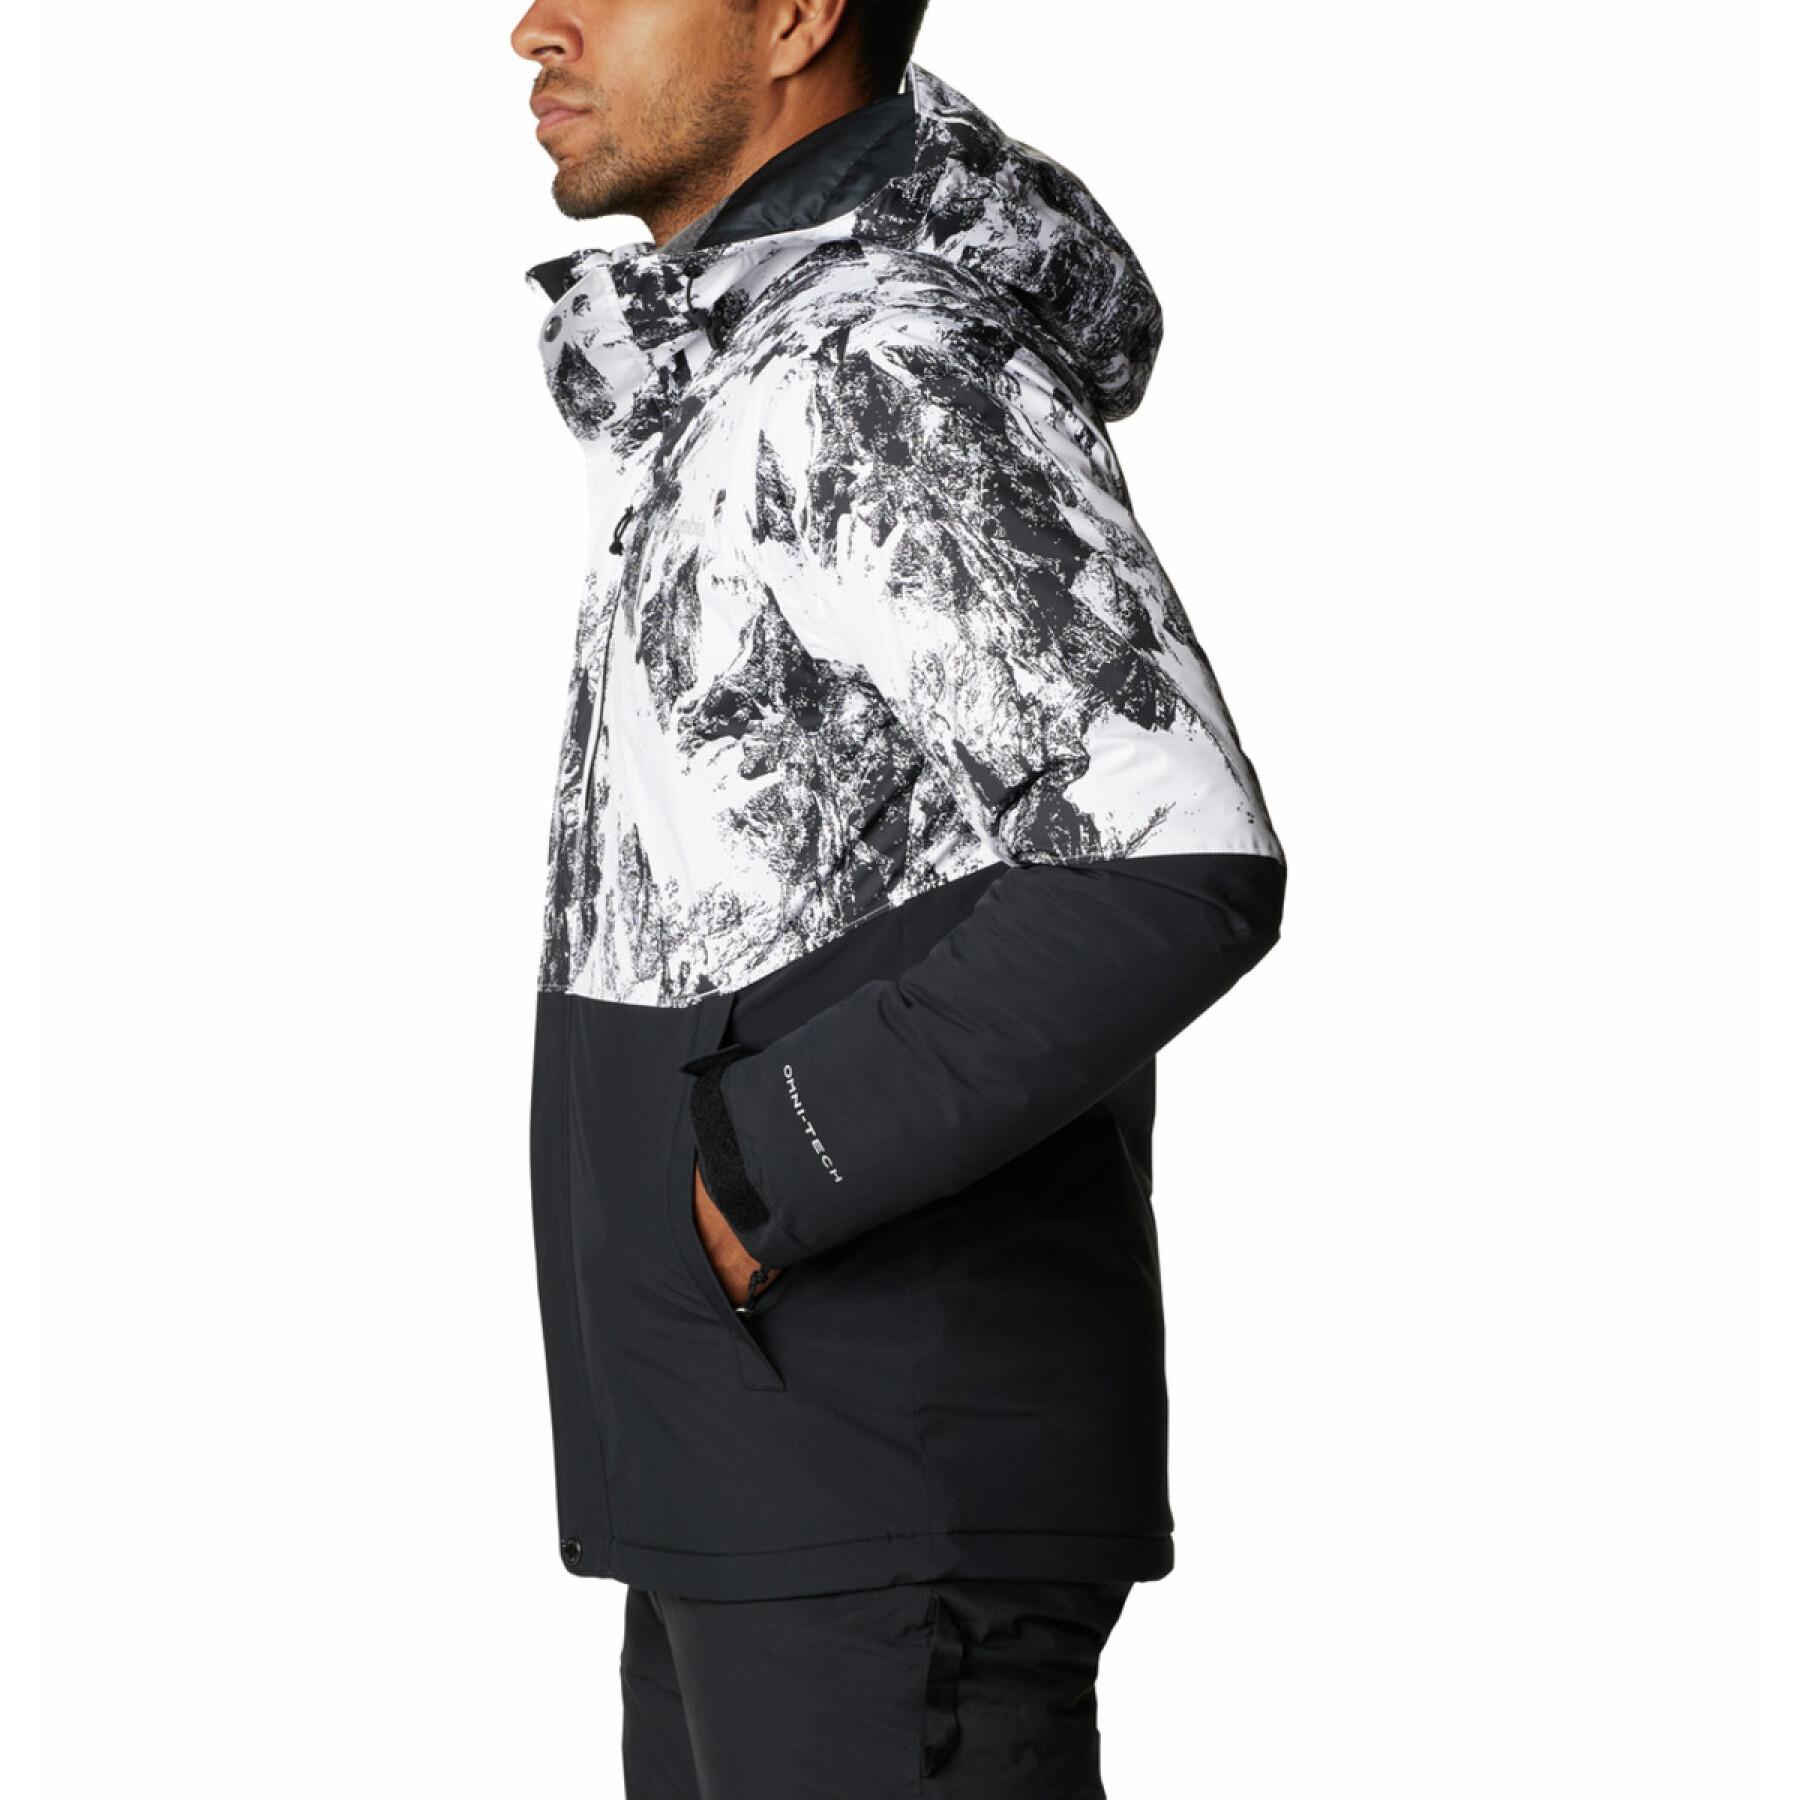 Chaqueta impermeable Columbia Winter District